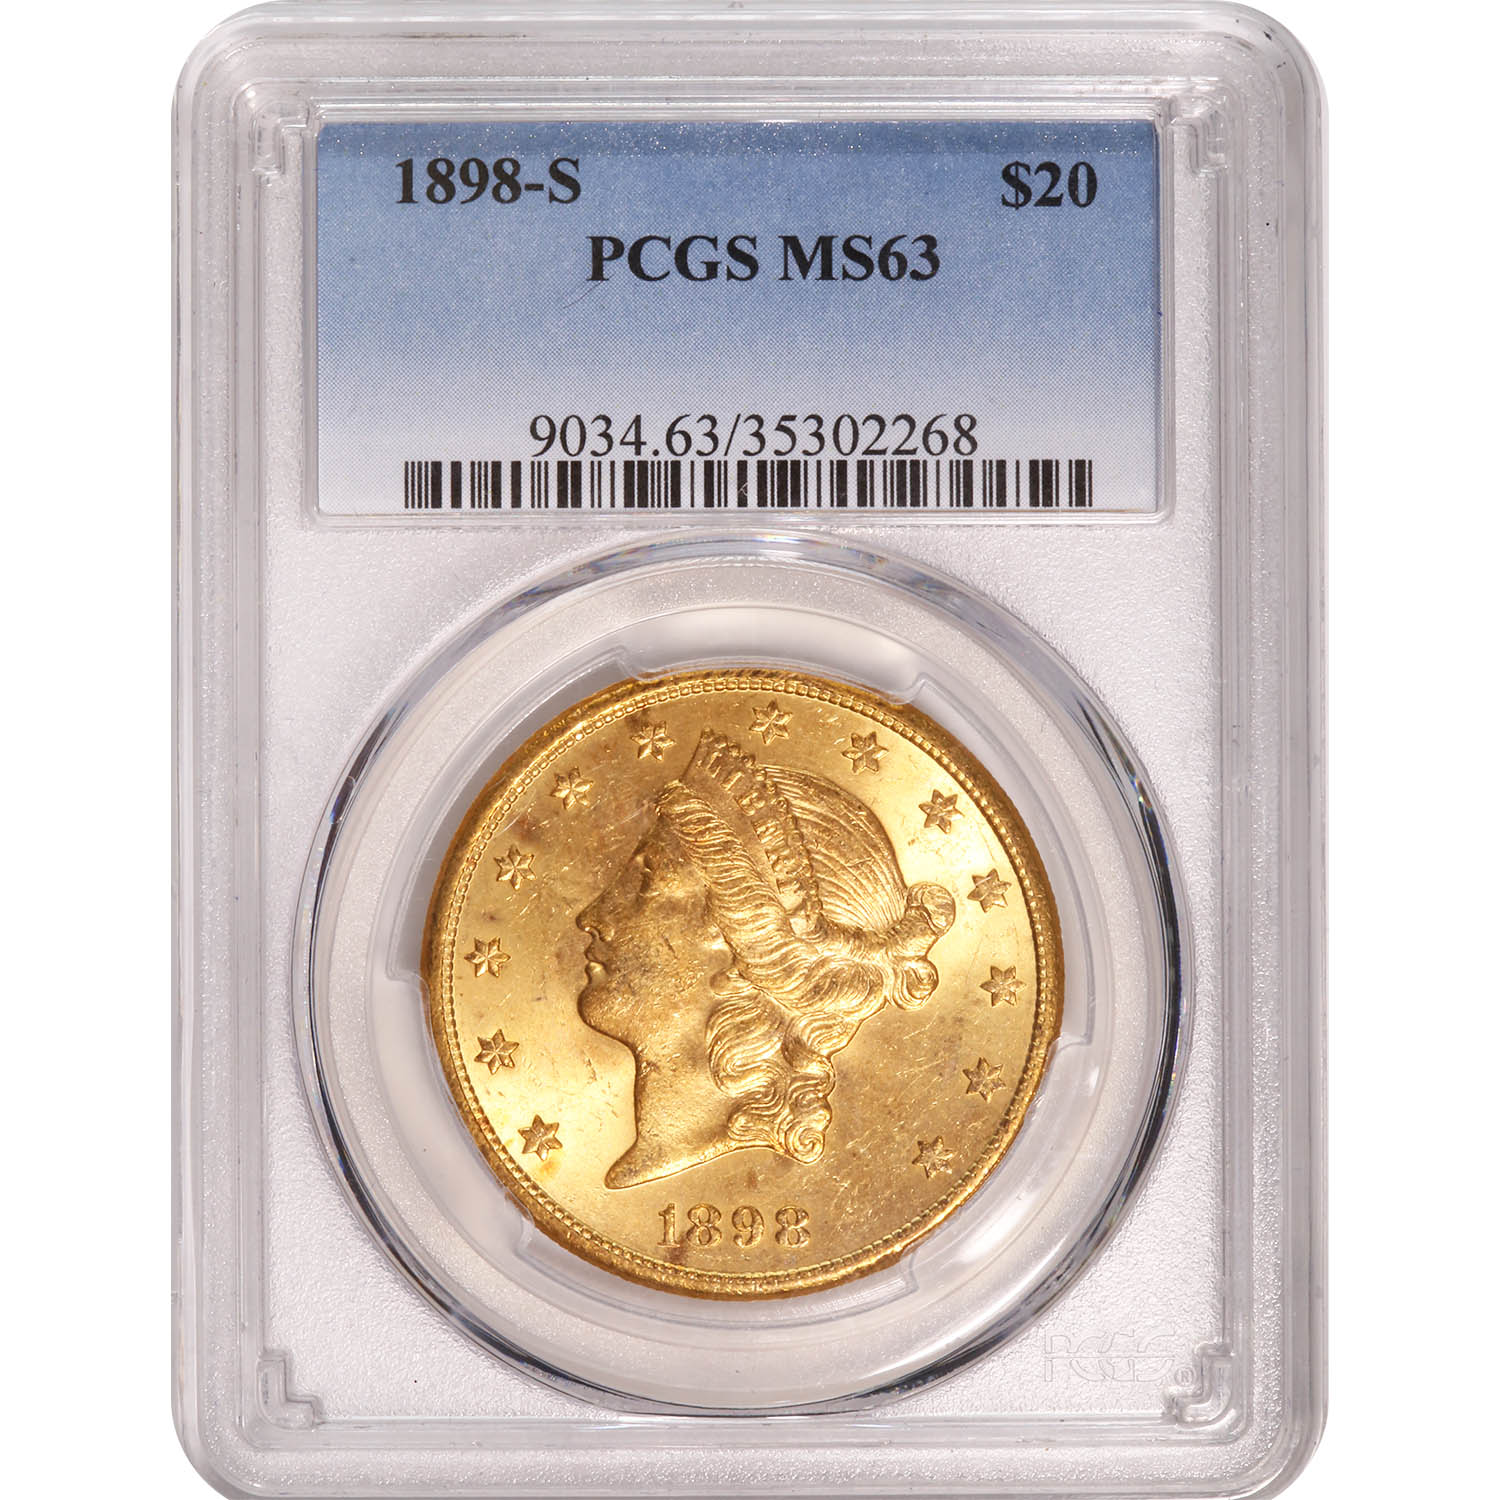 Certified US Gold $20 Liberty 1898-S MS63 PCGS